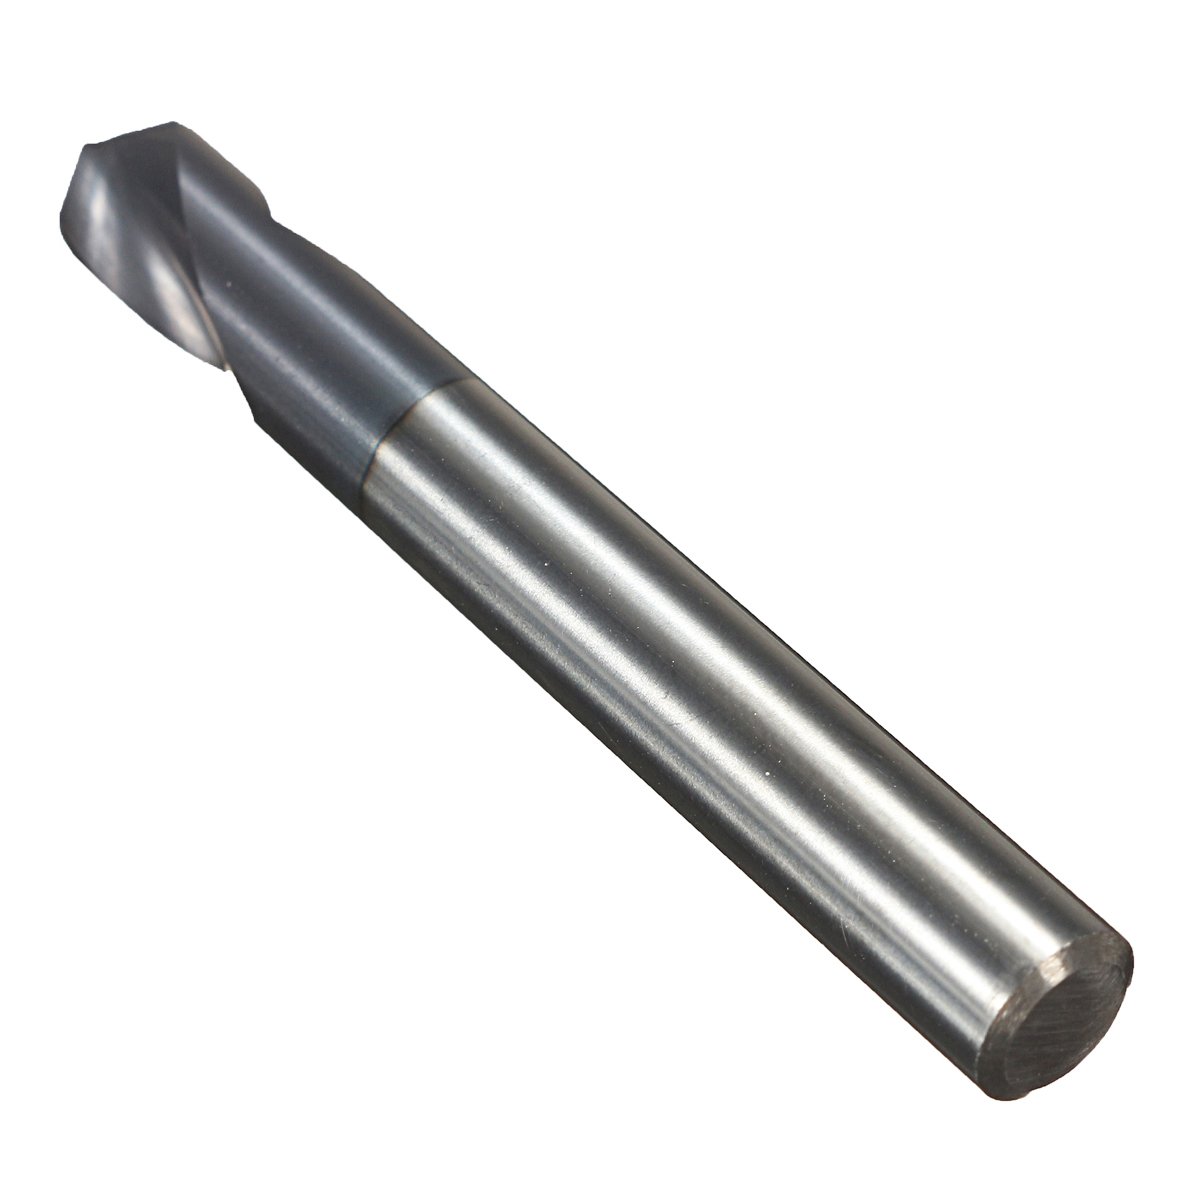 Drillpro-2-Flutes-6mm-Carbide-Chamfer-Mill-90-Degree-HRC45-Milling-Cutter-1108522-4